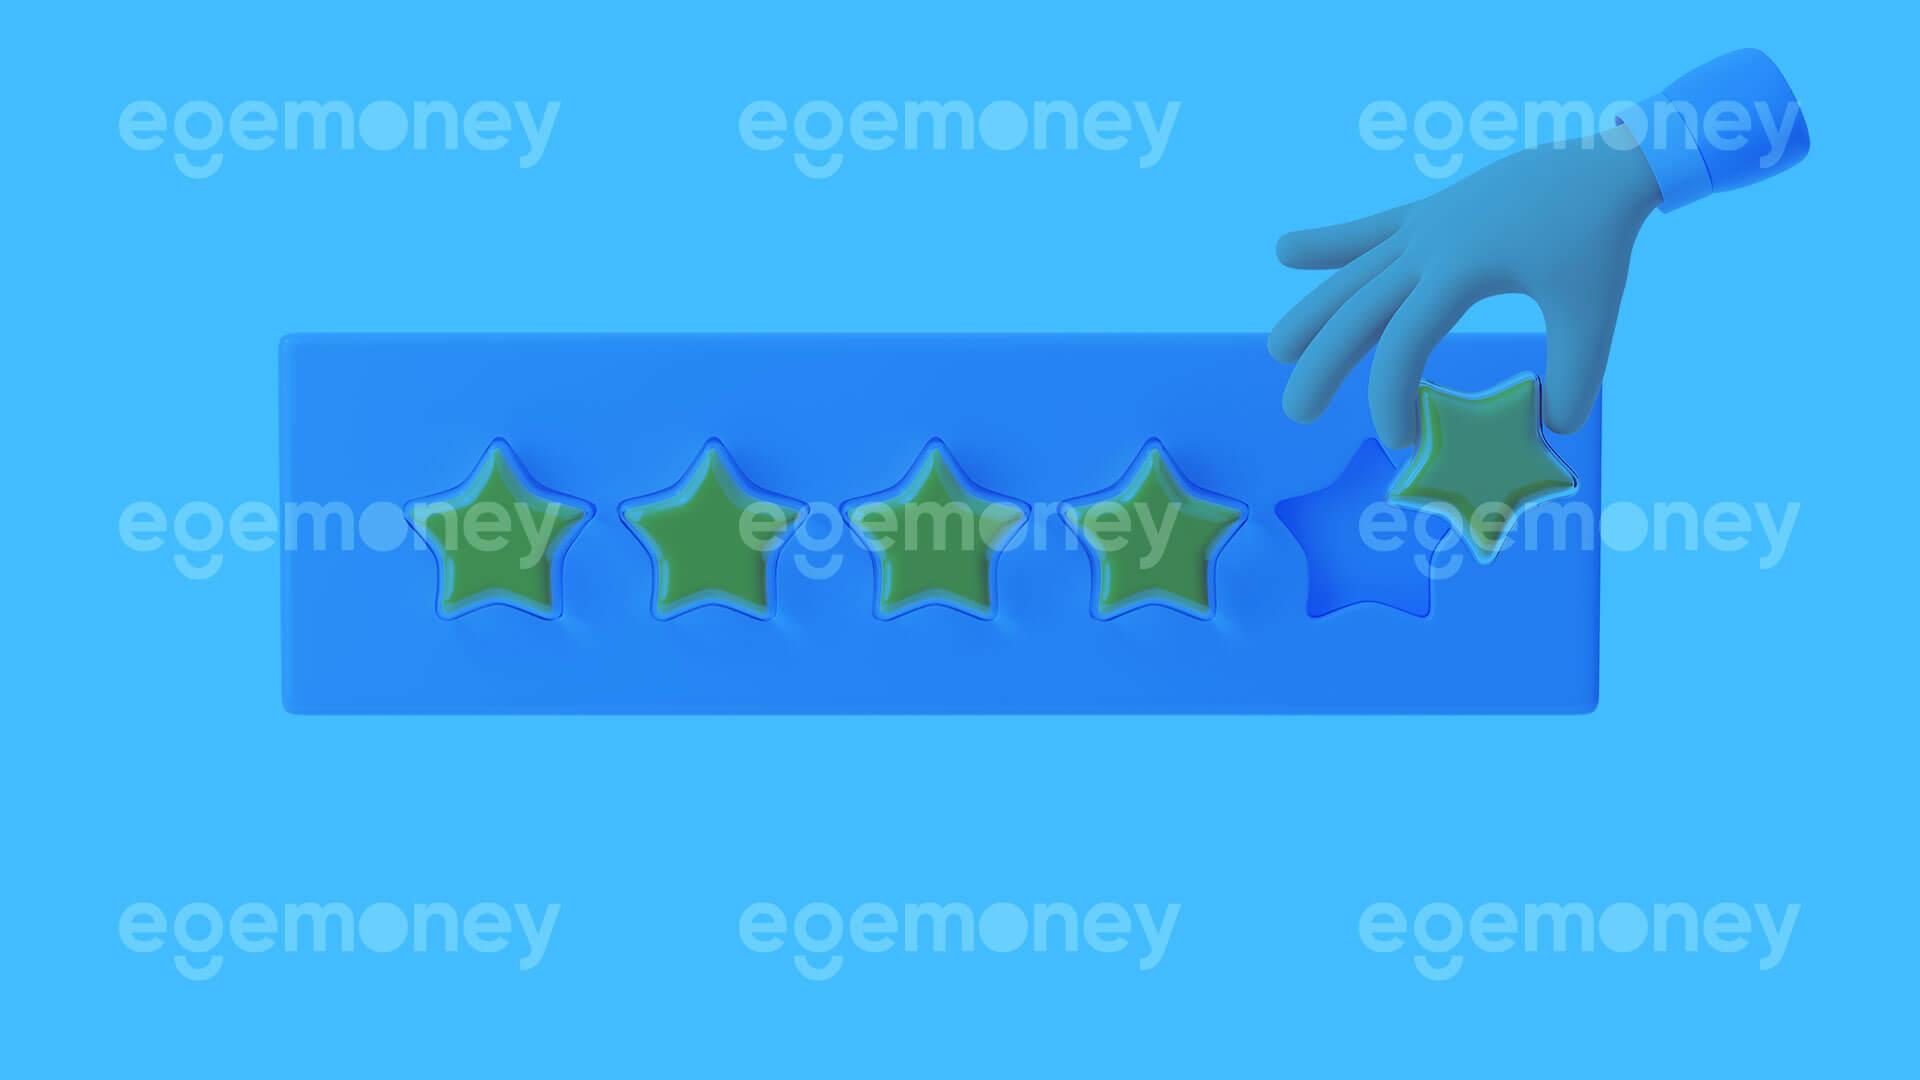 What Are The User Levels in EgeMoney?